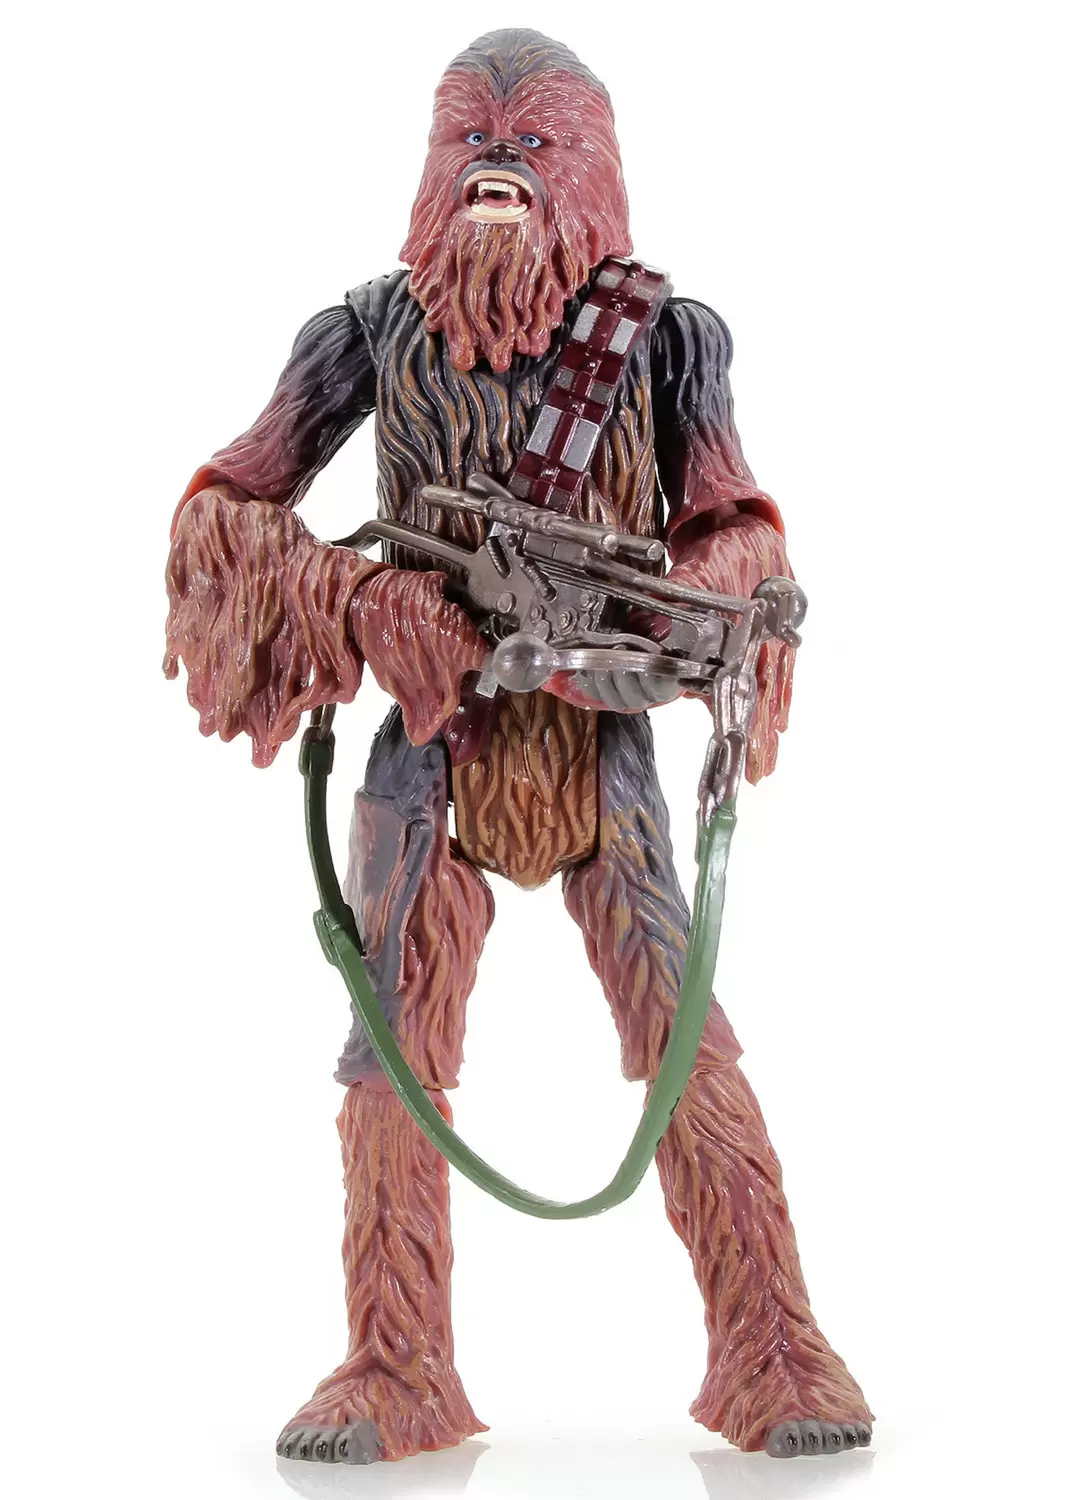 30th Anniversary Collection (TAC) - Chewbacca